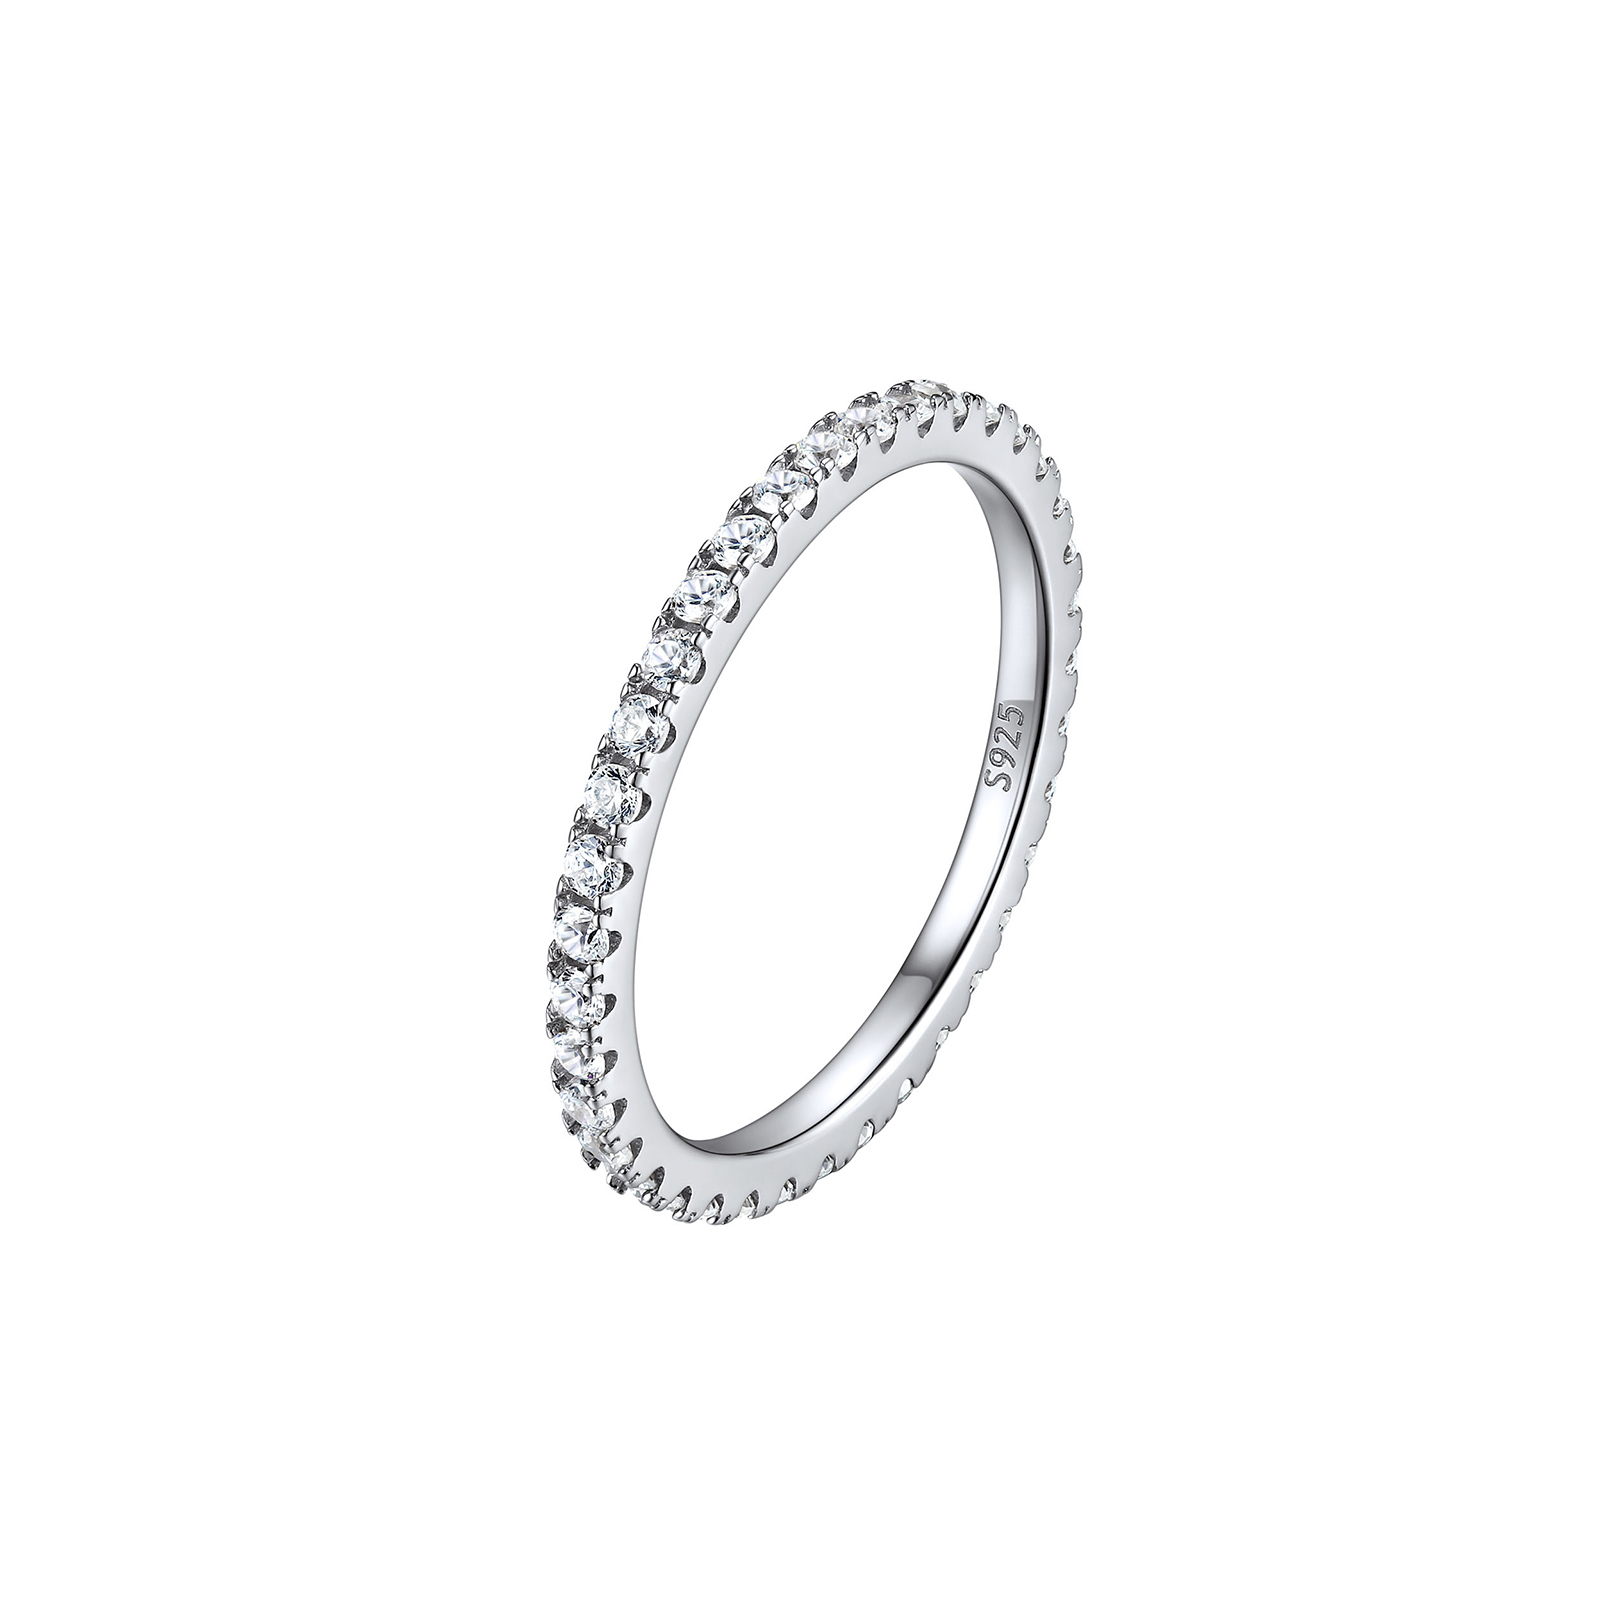 ChicSilver S925 Cubic Zirconia Stackable Ring Eternity Wedding Band, Size 4-12